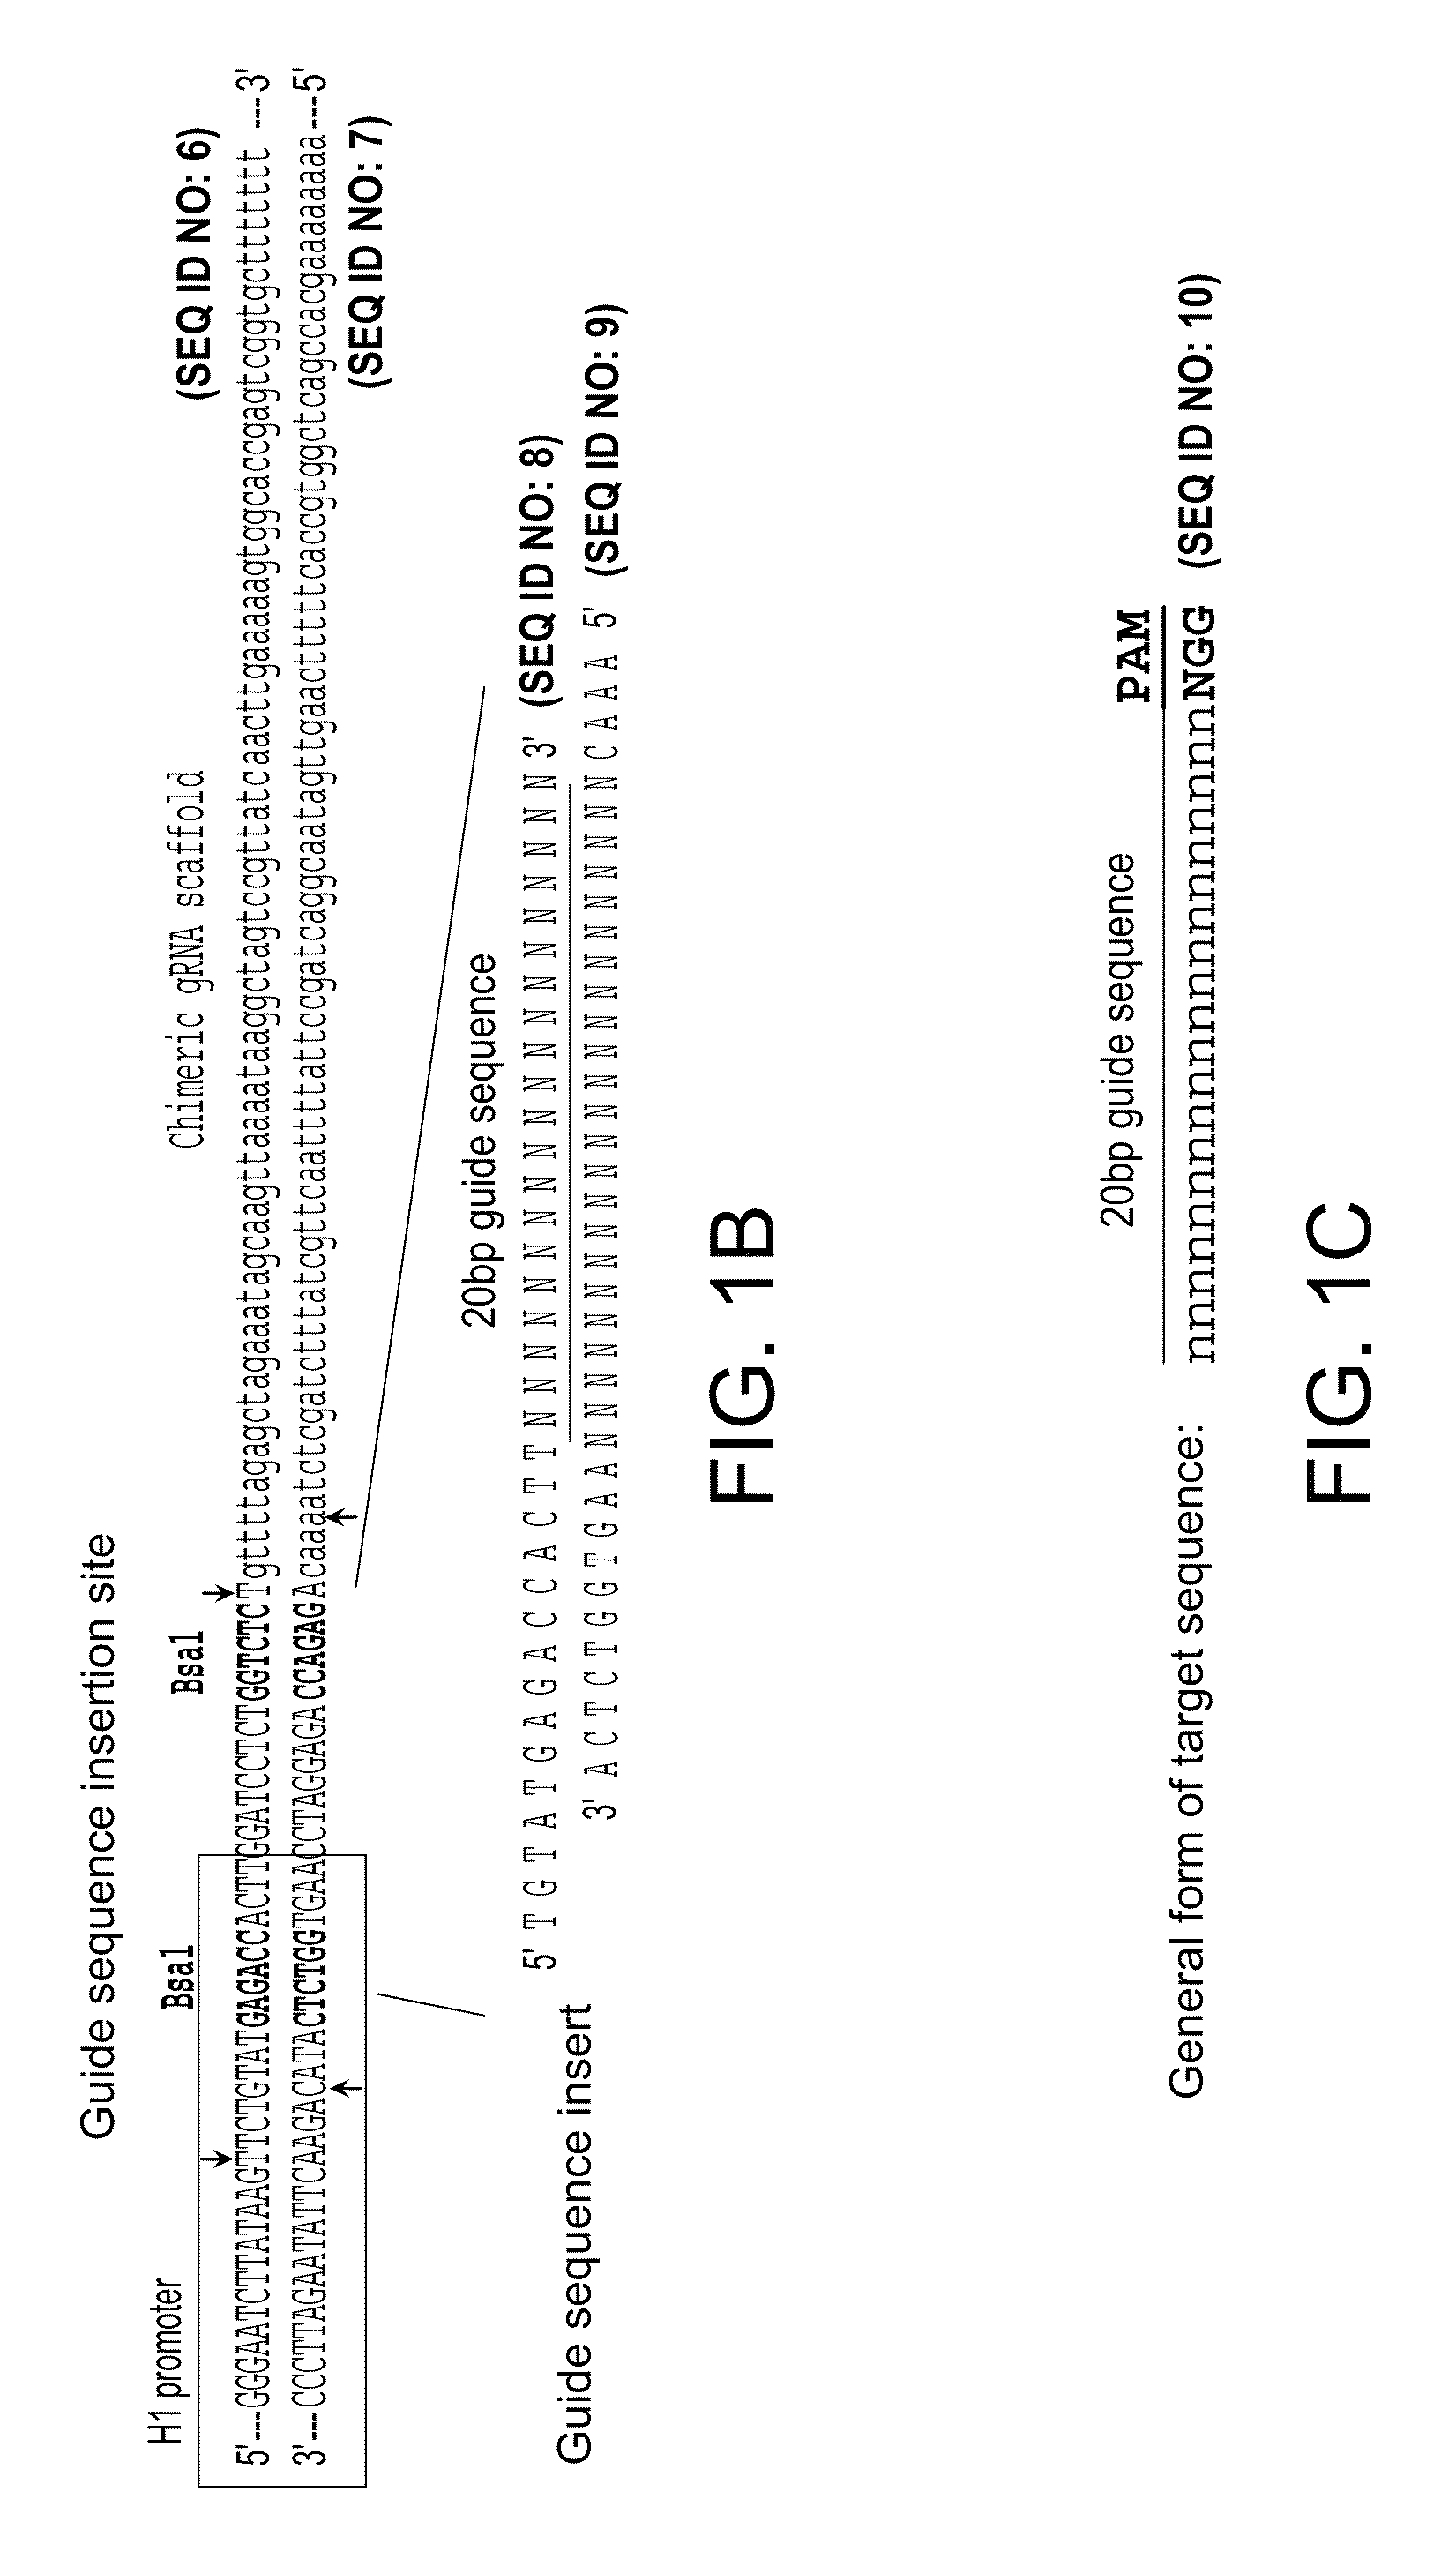 Compositions and methods directed to CRISPR/Cas genomic engineering systems